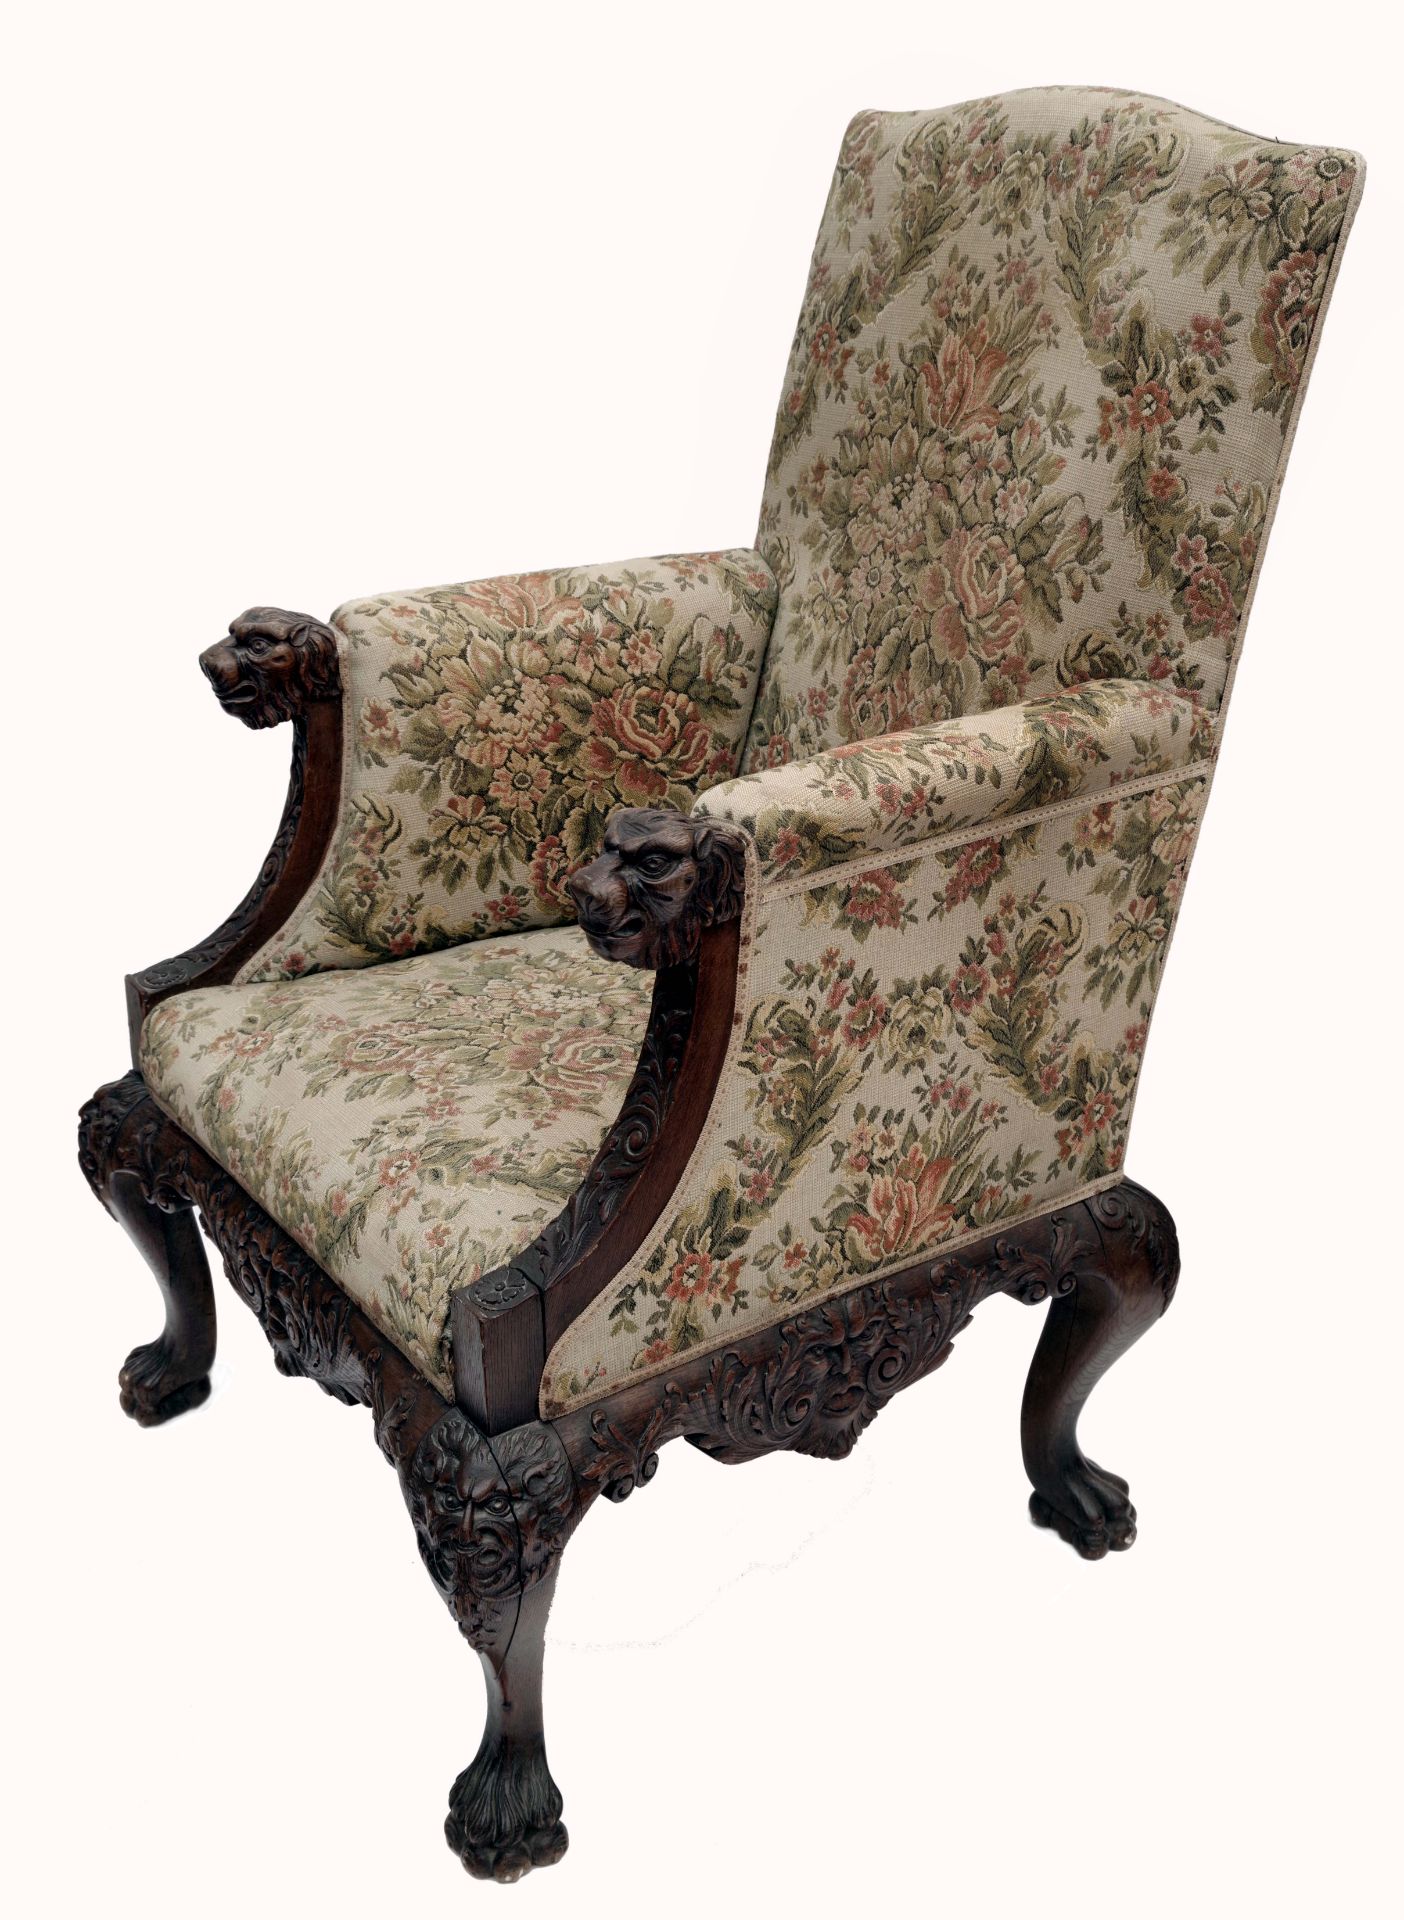 Luxury Baroque-style Carved Armchair - Image 2 of 4